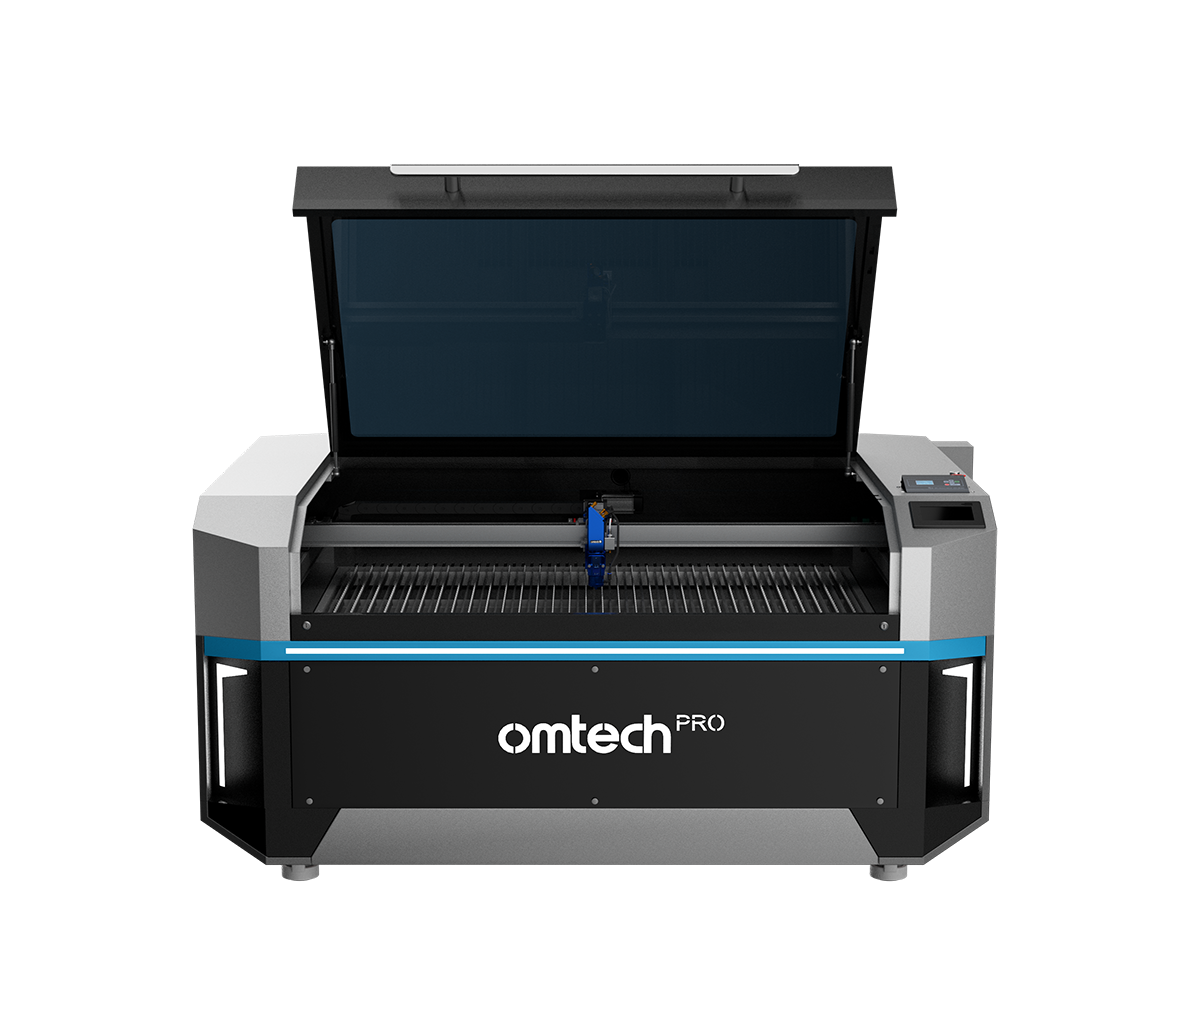 OMTech Pro 3655 Hybrid, 150W Hybrid LASER ENGRAVER CUTTING MACHINE WITH  36'' X 55'' WORKING AREA (WITH AUTOFOCUS and Built-in Water Chiller)